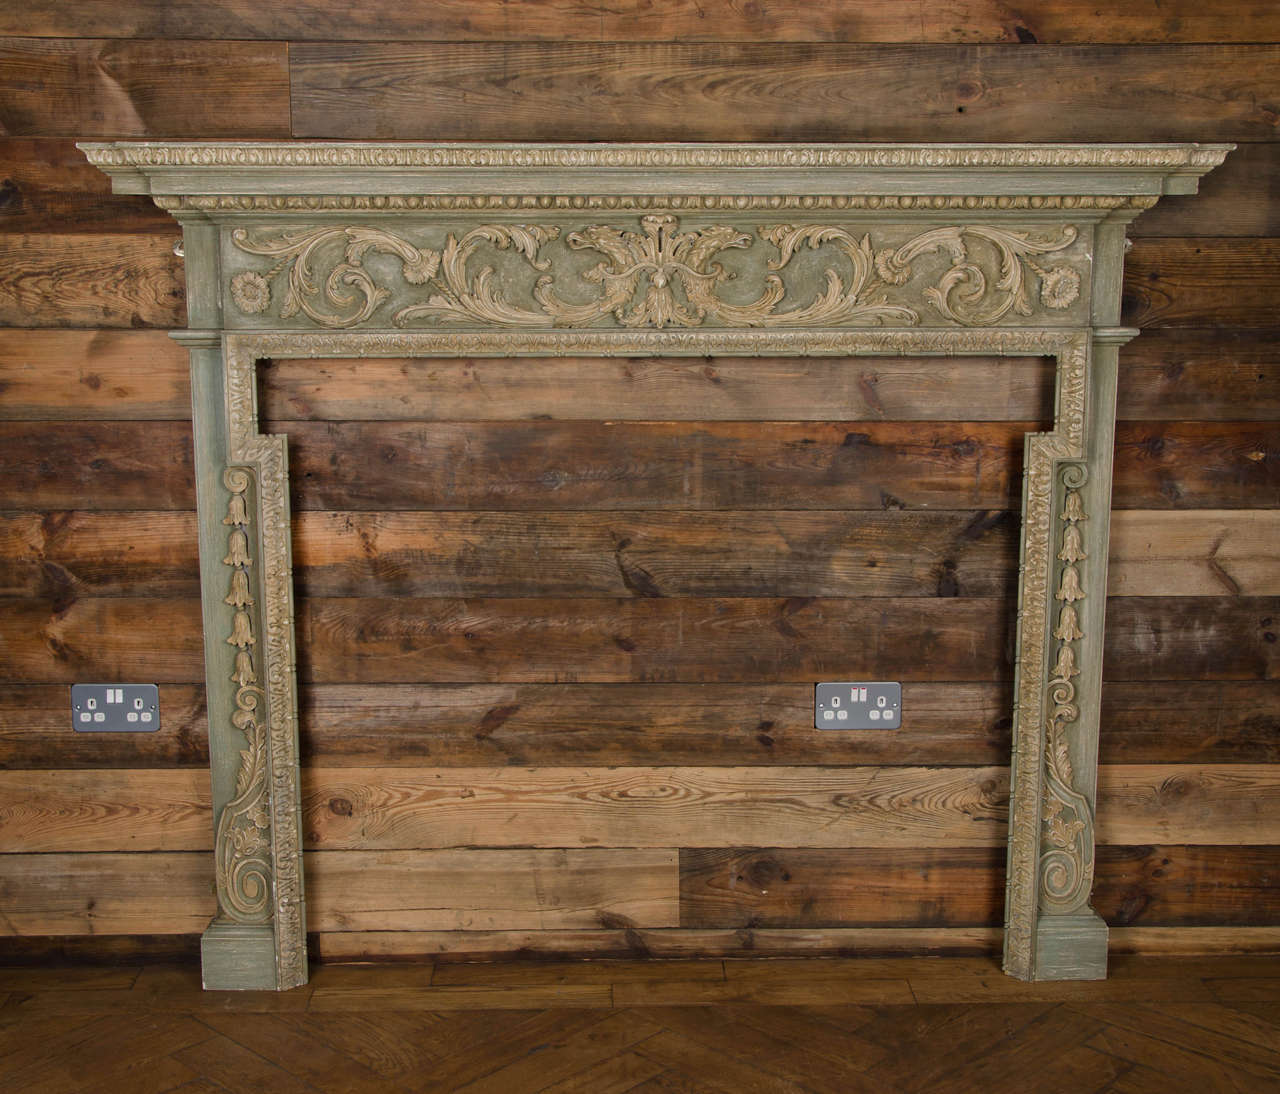 A magnificent Georgian style fireplace surround in wood. This intricately carved wooden fire surround features a breakfront shelf with acanthus leaf trim and a spectacularly, finely carved frieze of detailed acanthus leaves and flowers. The slim,